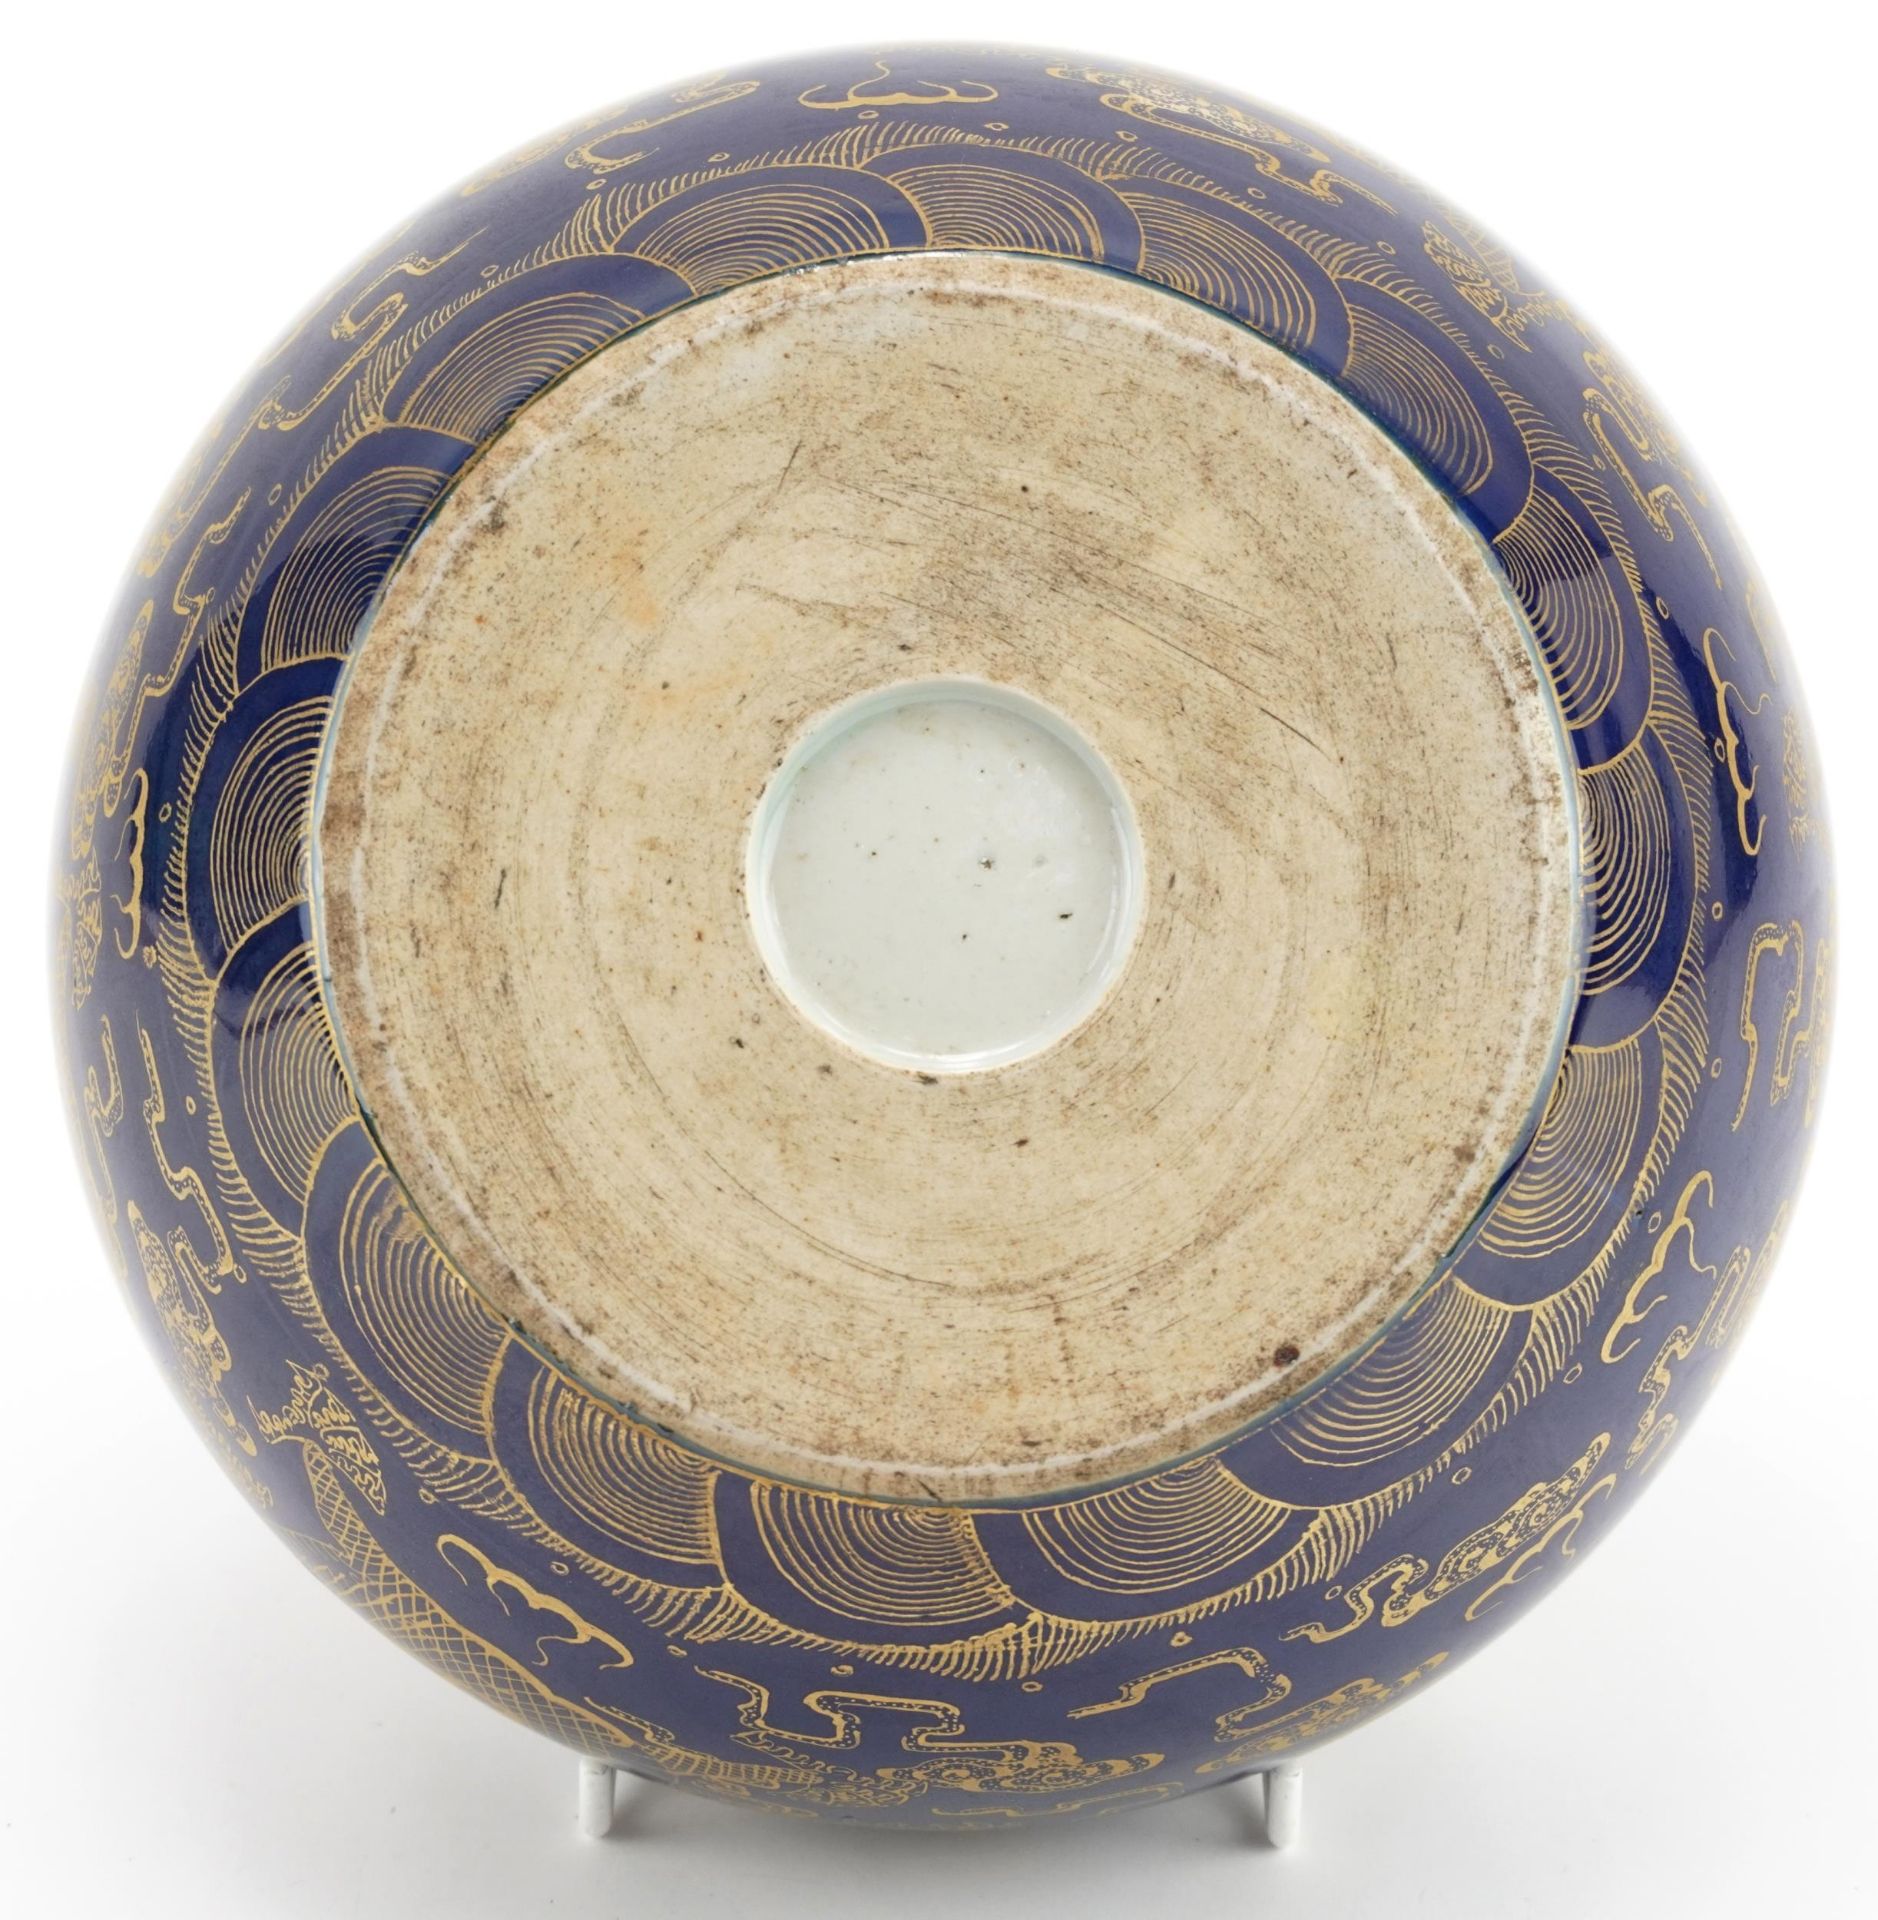 Chinese porcelain powder blue ground jardiniere gilded with dragons chasing the flaming pearl - Image 6 of 6